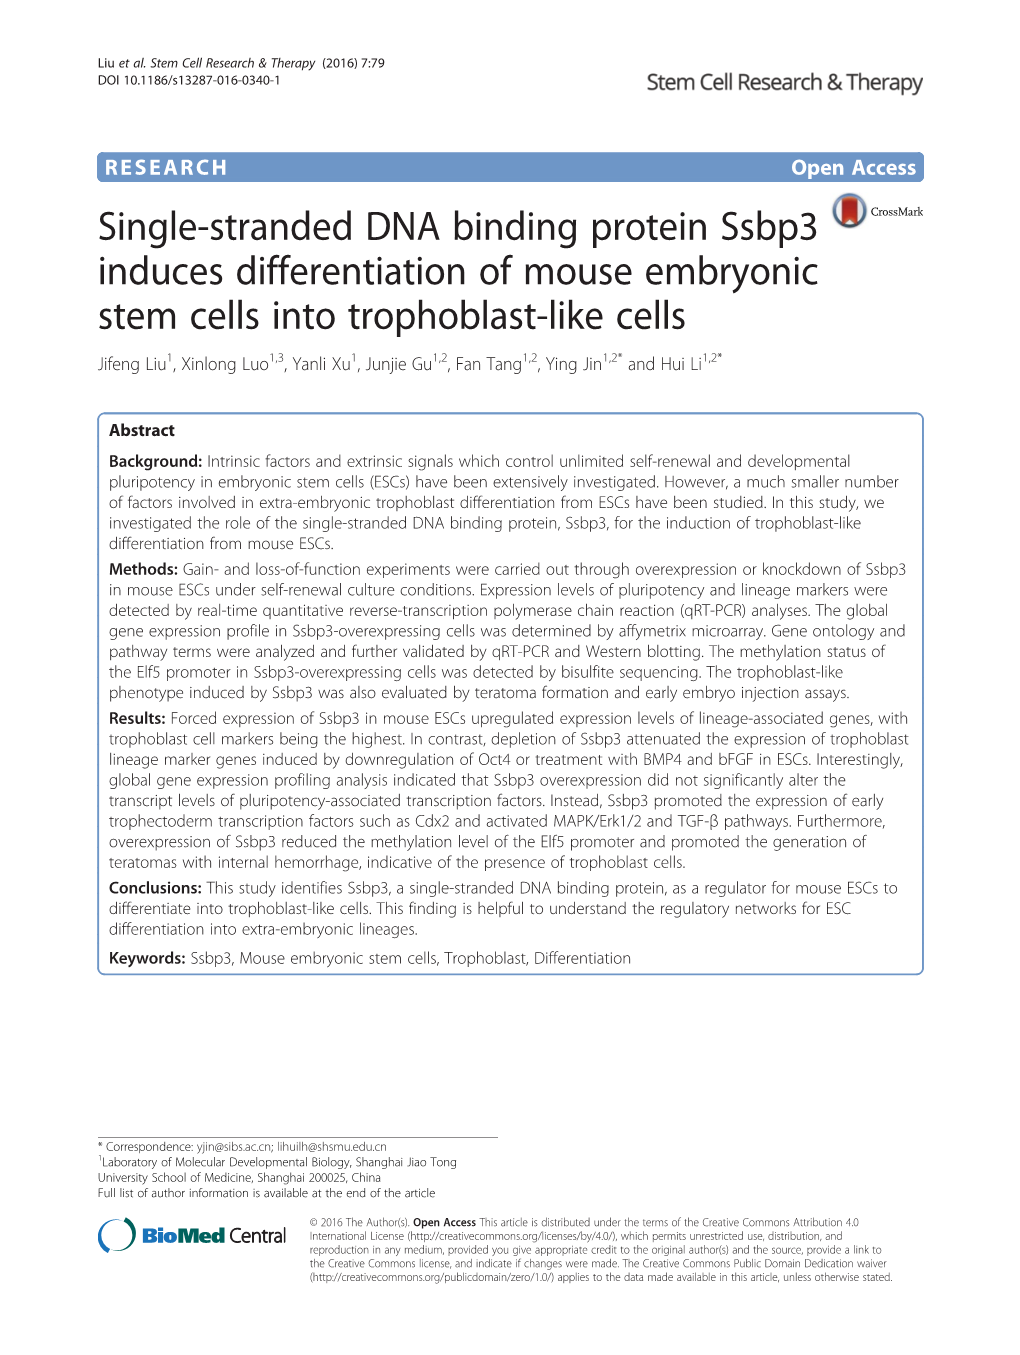 Single-Stranded DNA Binding Protein Ssbp3 Induces Differentiation Of